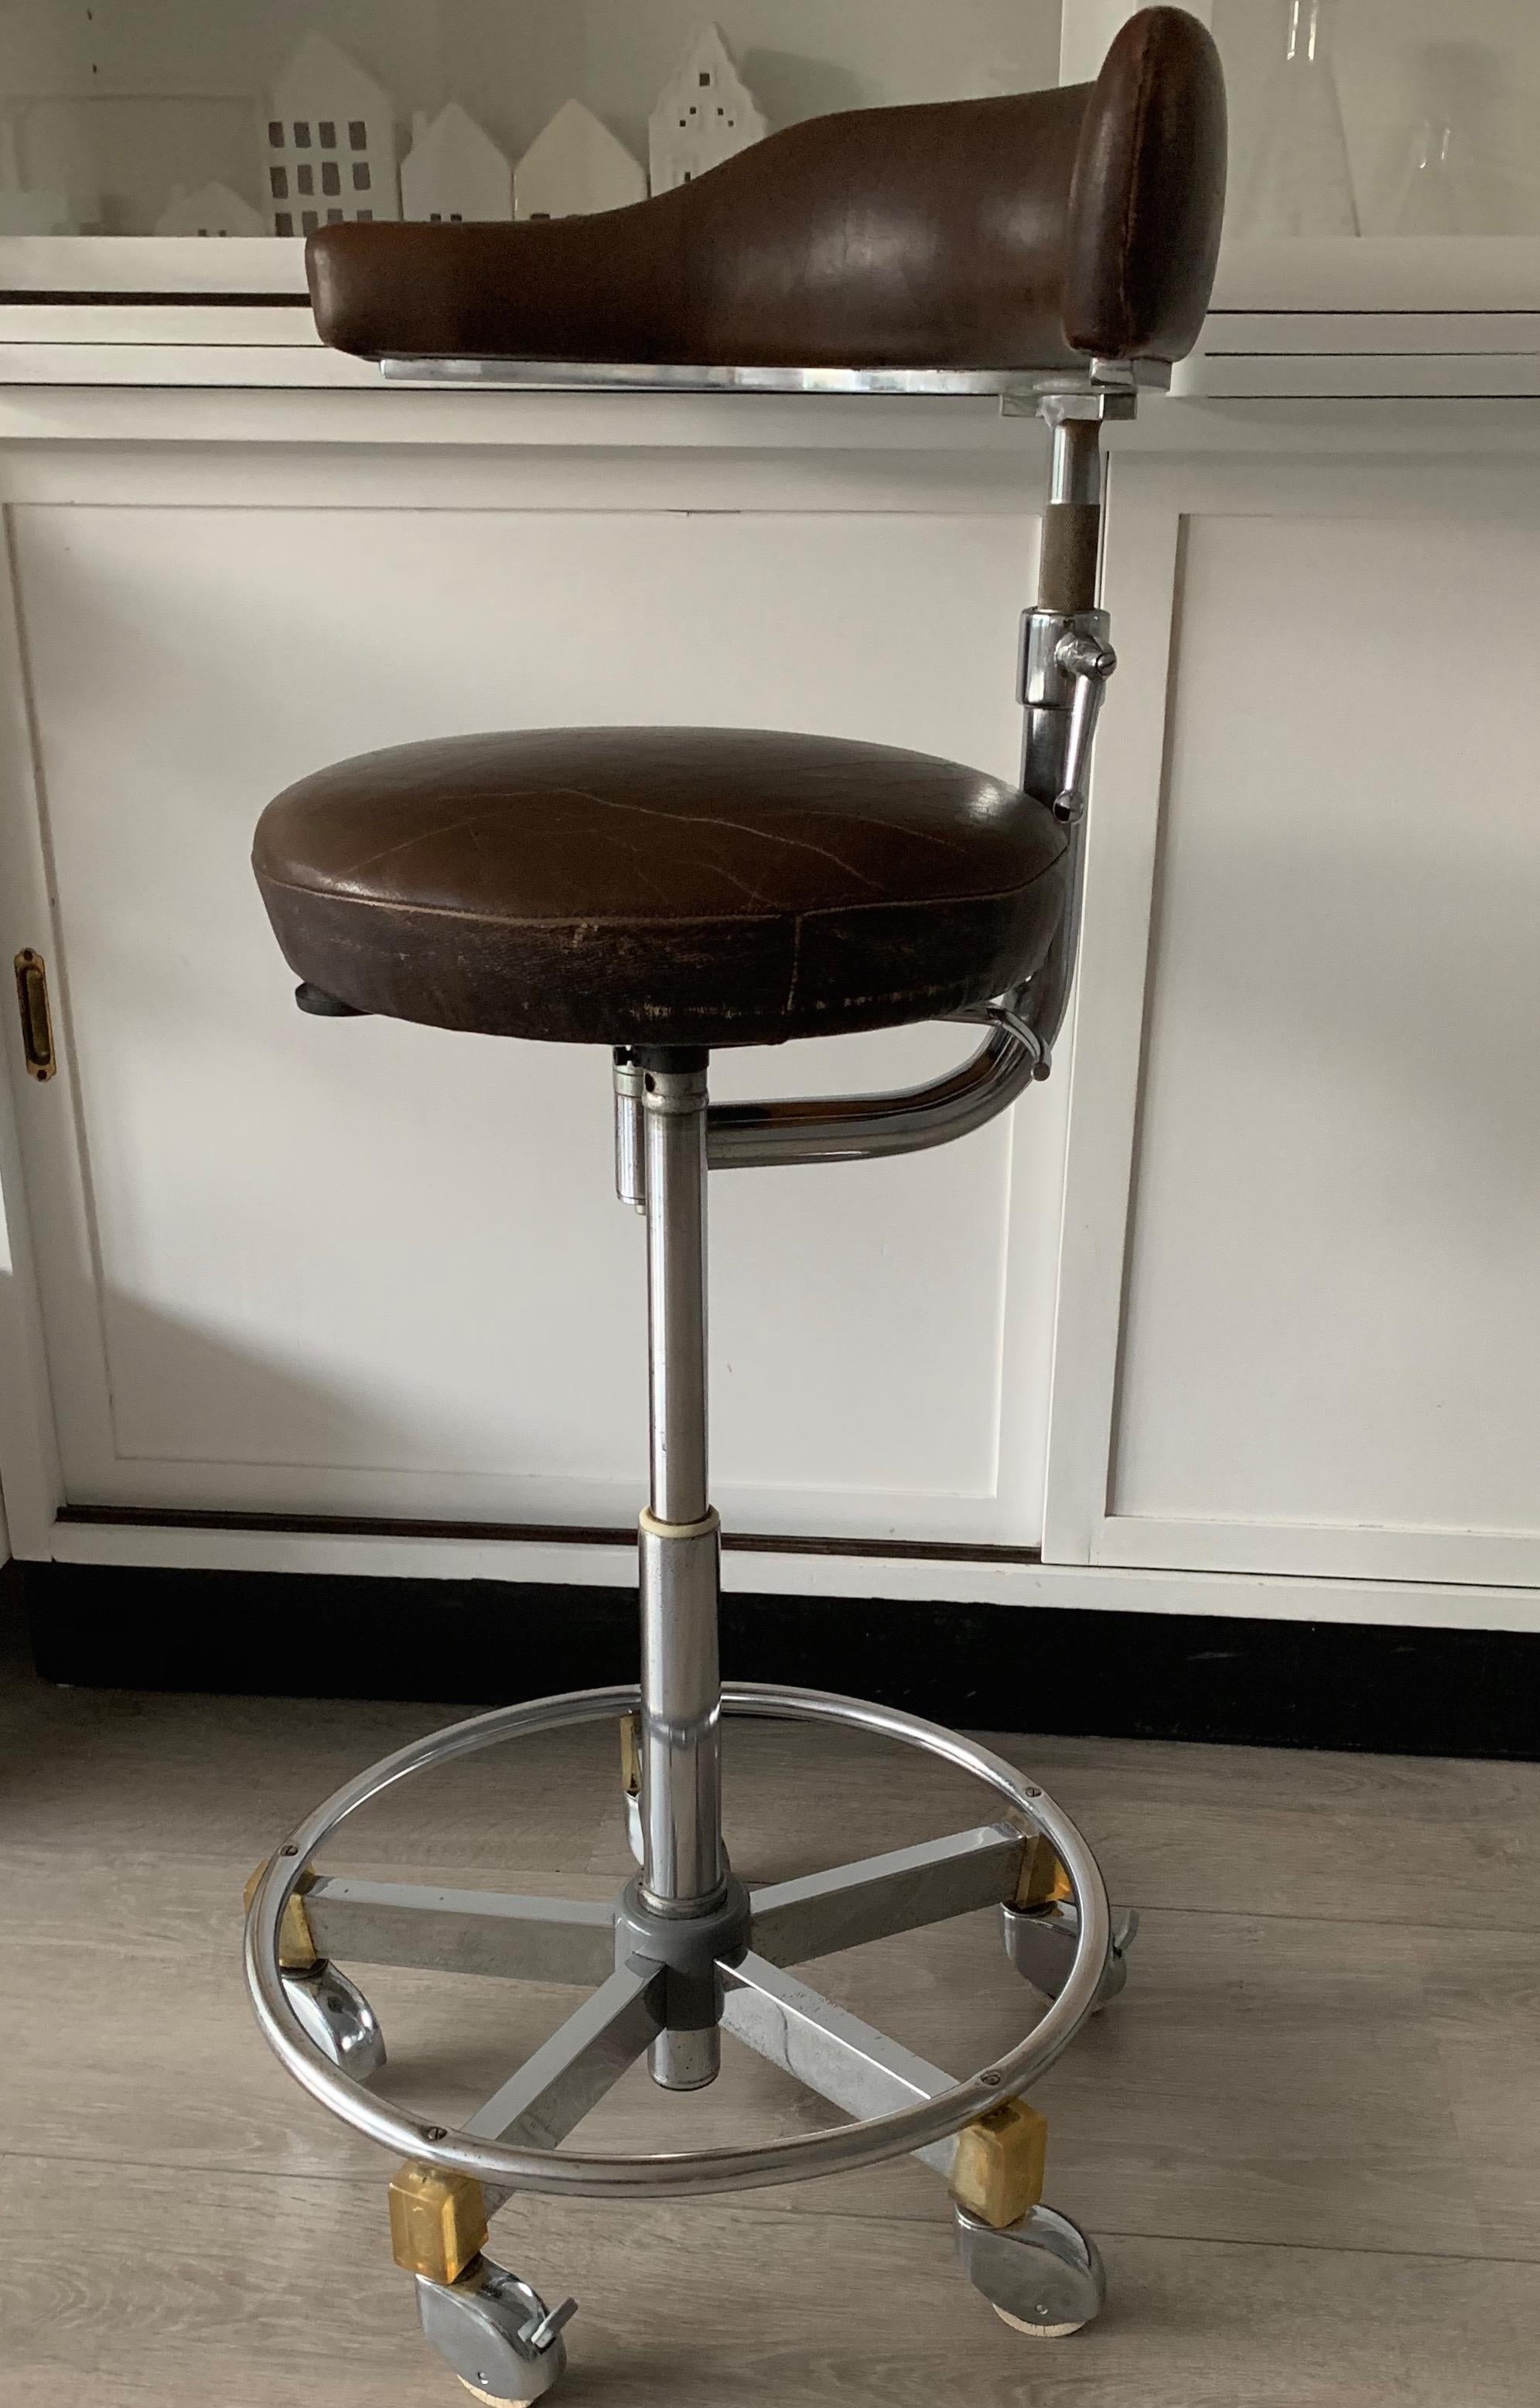 Great midcentury design high-stool that is strong, sturdy and durable.

Here is another one of our recent great finds that ticks al the boxes, because this early 1970s stool with a single arm rest is rare, it has the perfect look, it has the quality